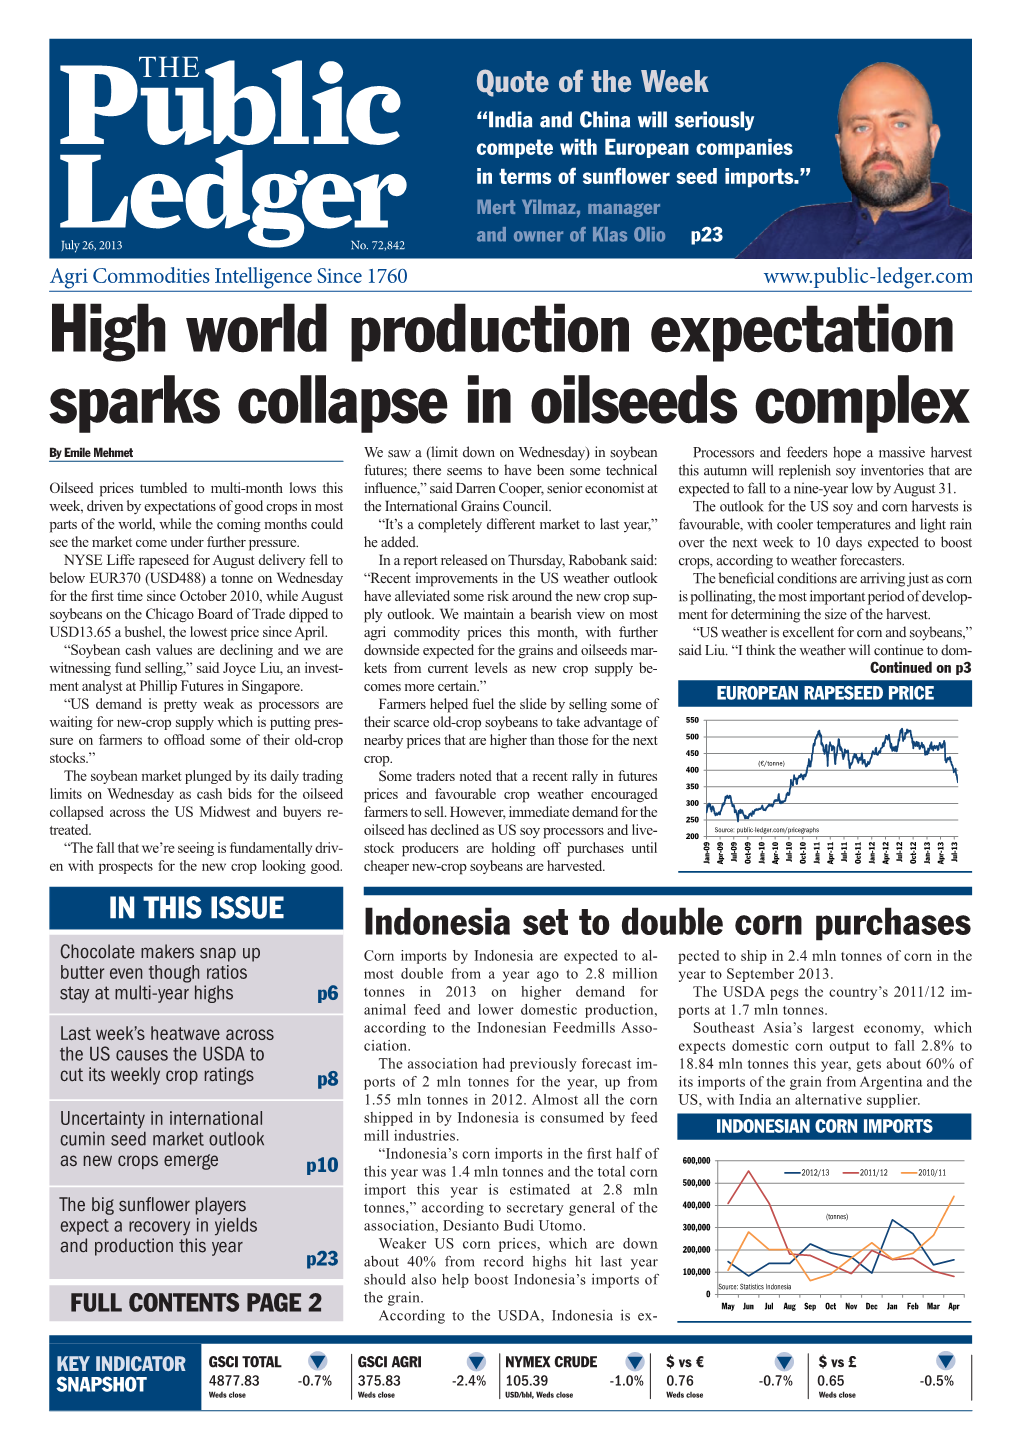 High World Production Expectation Sparks Collapse in Oilseeds Complex